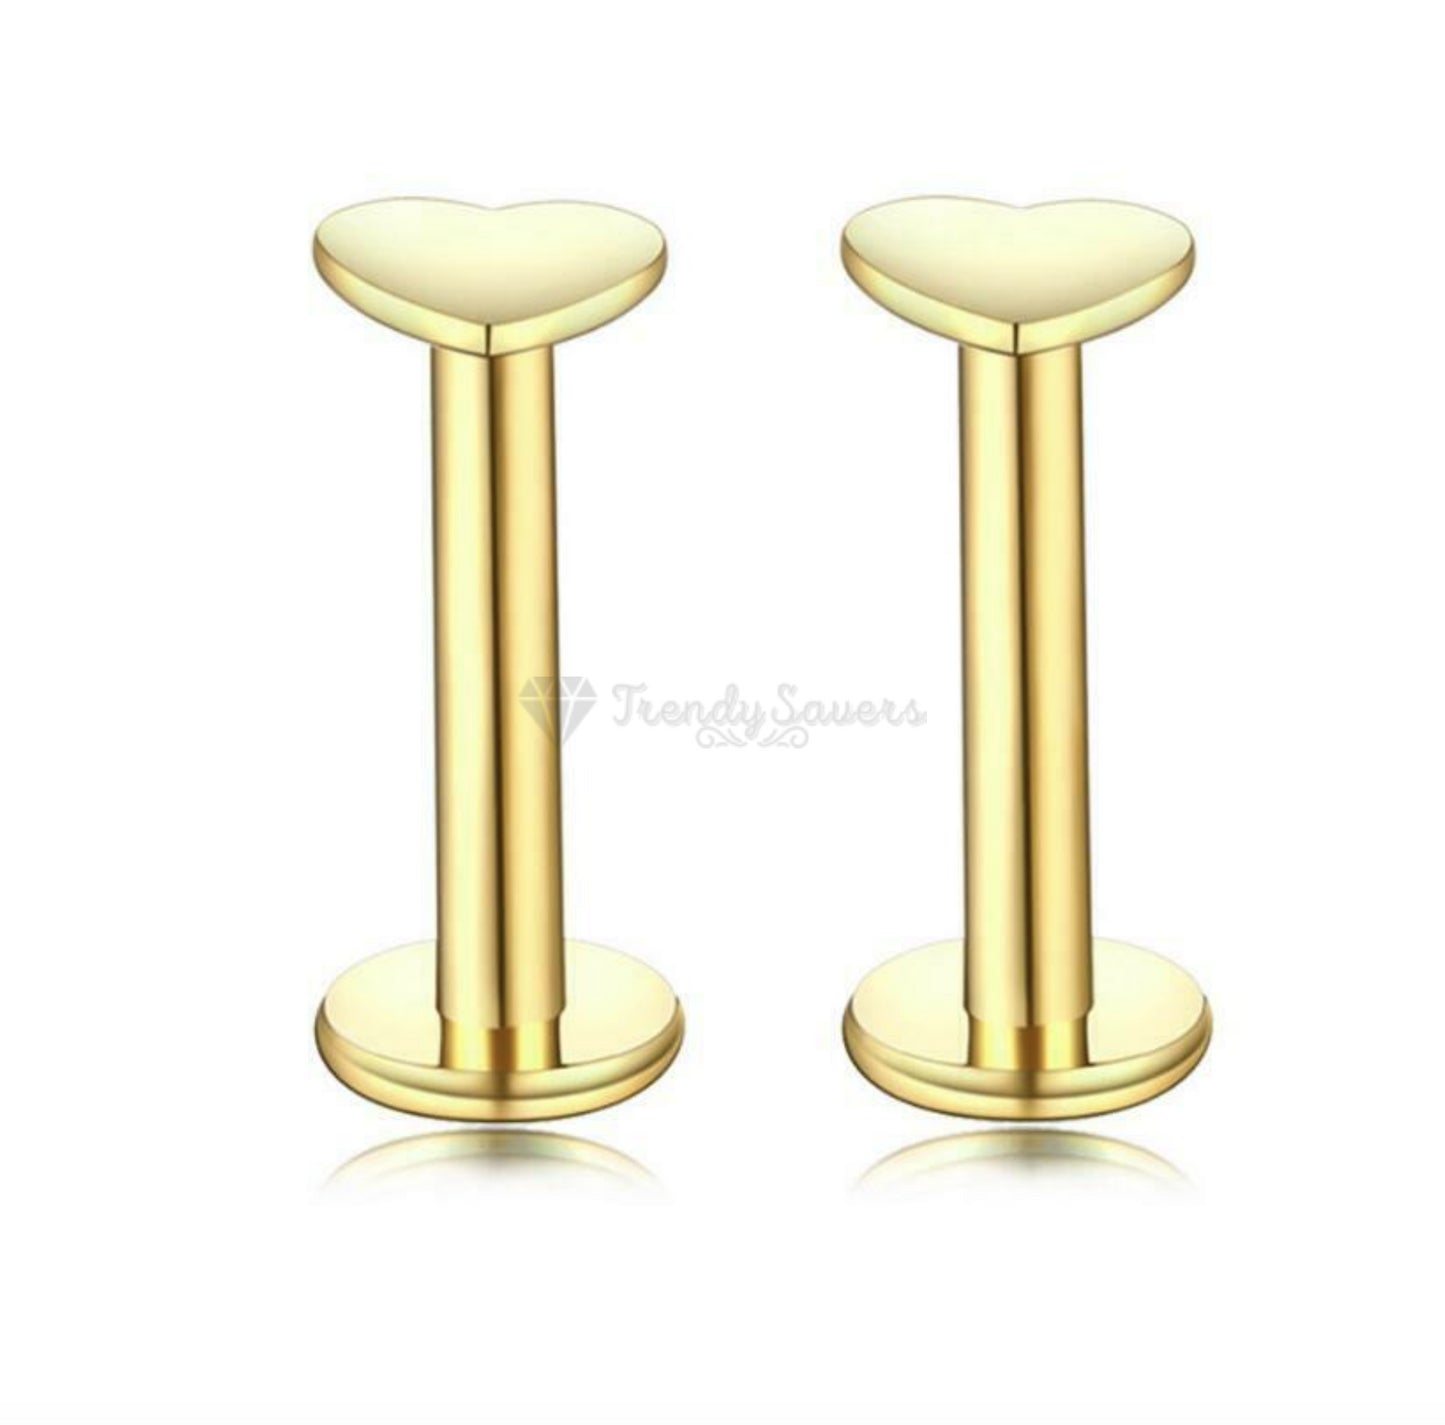 18ct Gold Plated Labret Monroe 3MM Heart Stud Rings Ear Nose Lip Piercing Pair